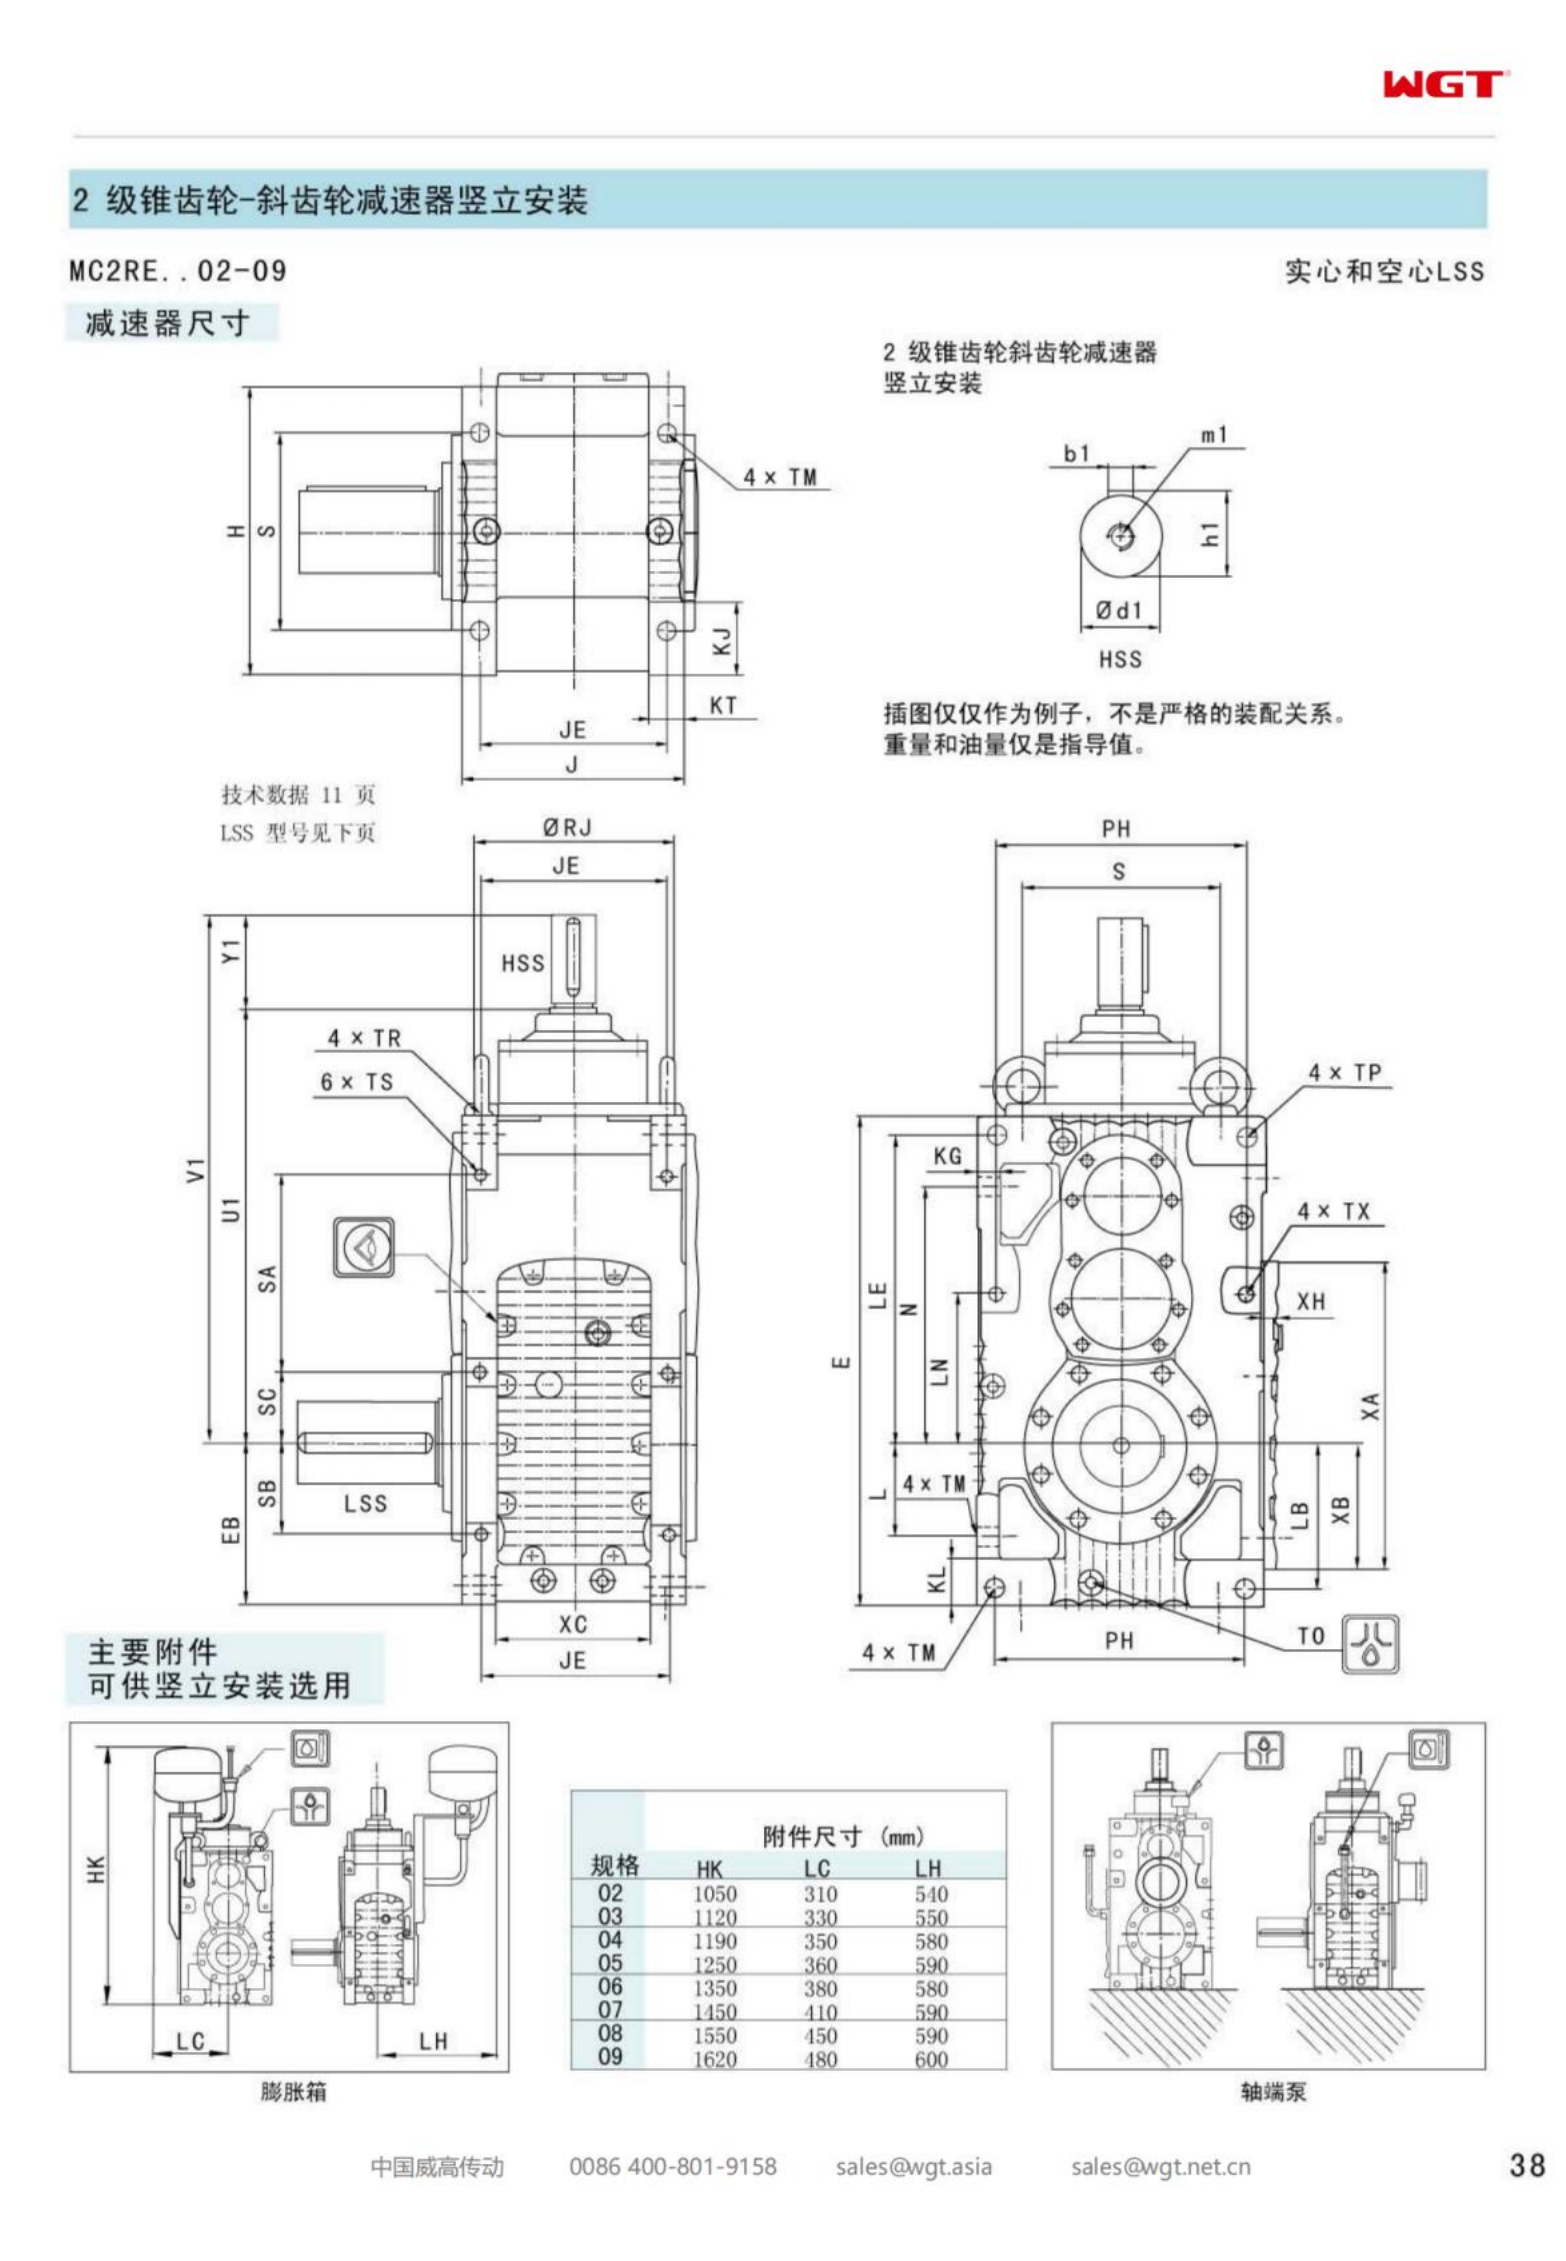 MC2RESF03 Replace_SEW_MC_Series Gearbox